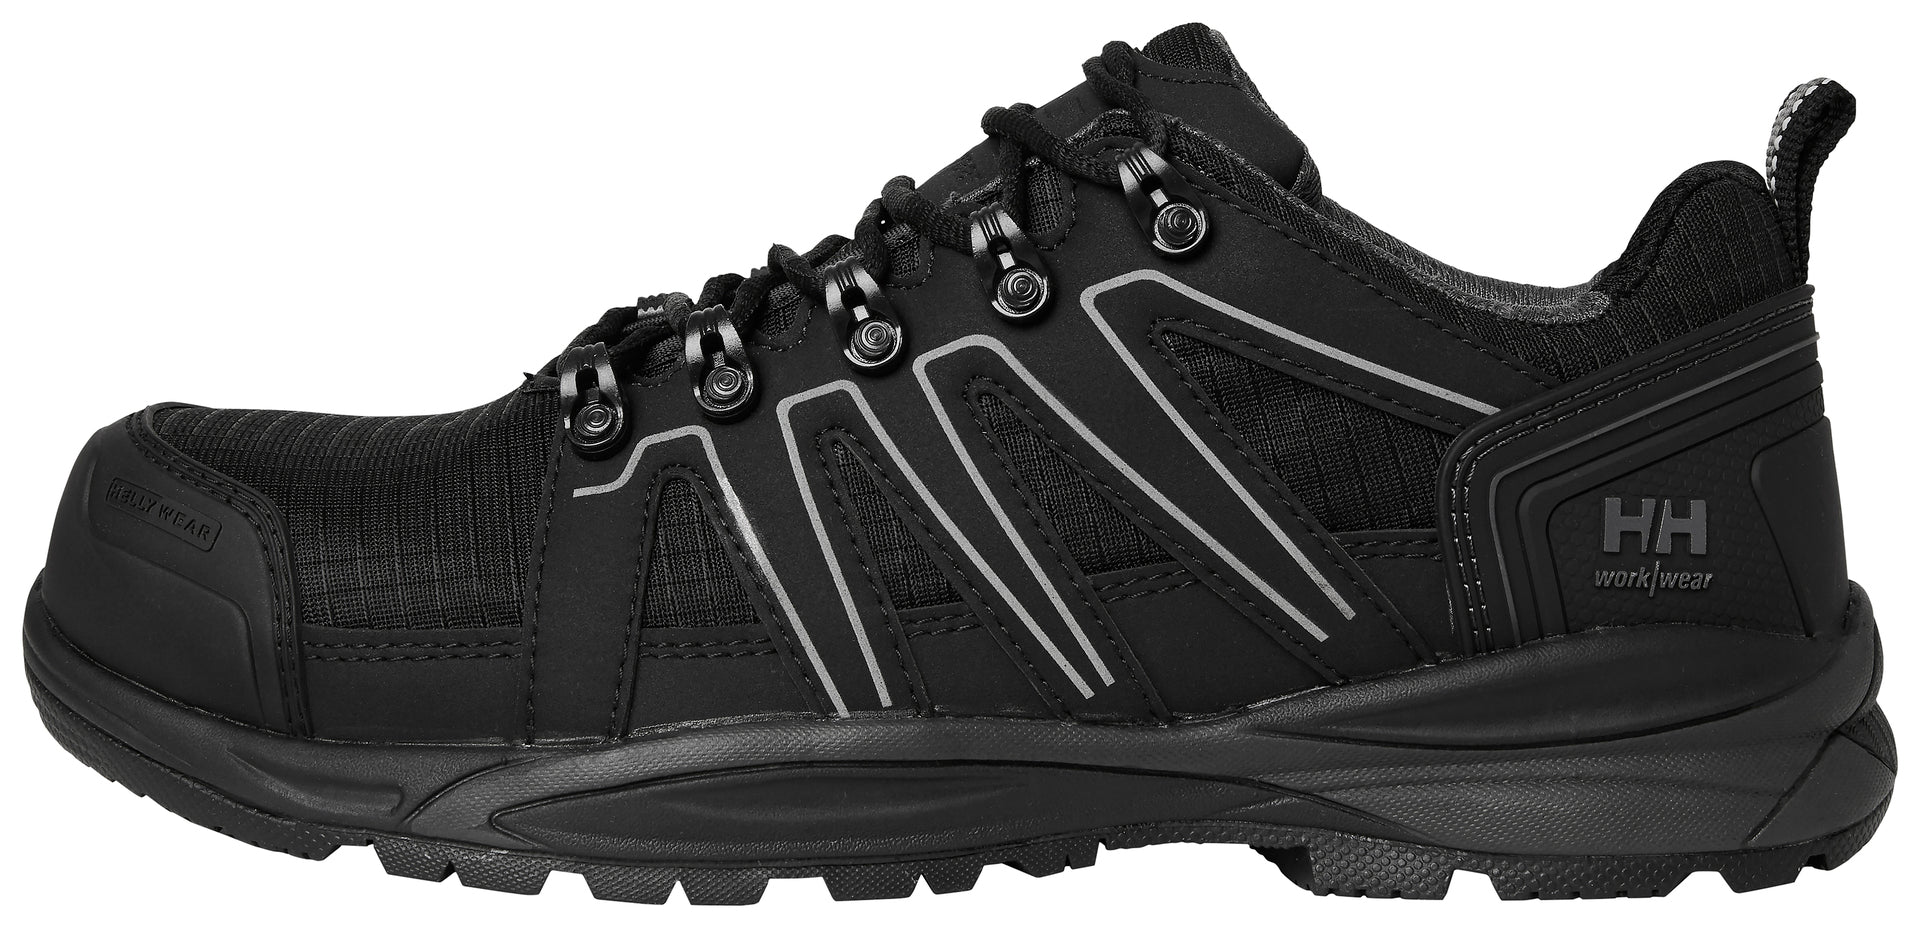 Helly Hansen Manchester Low S3 Safety Shoes - Black/Grey